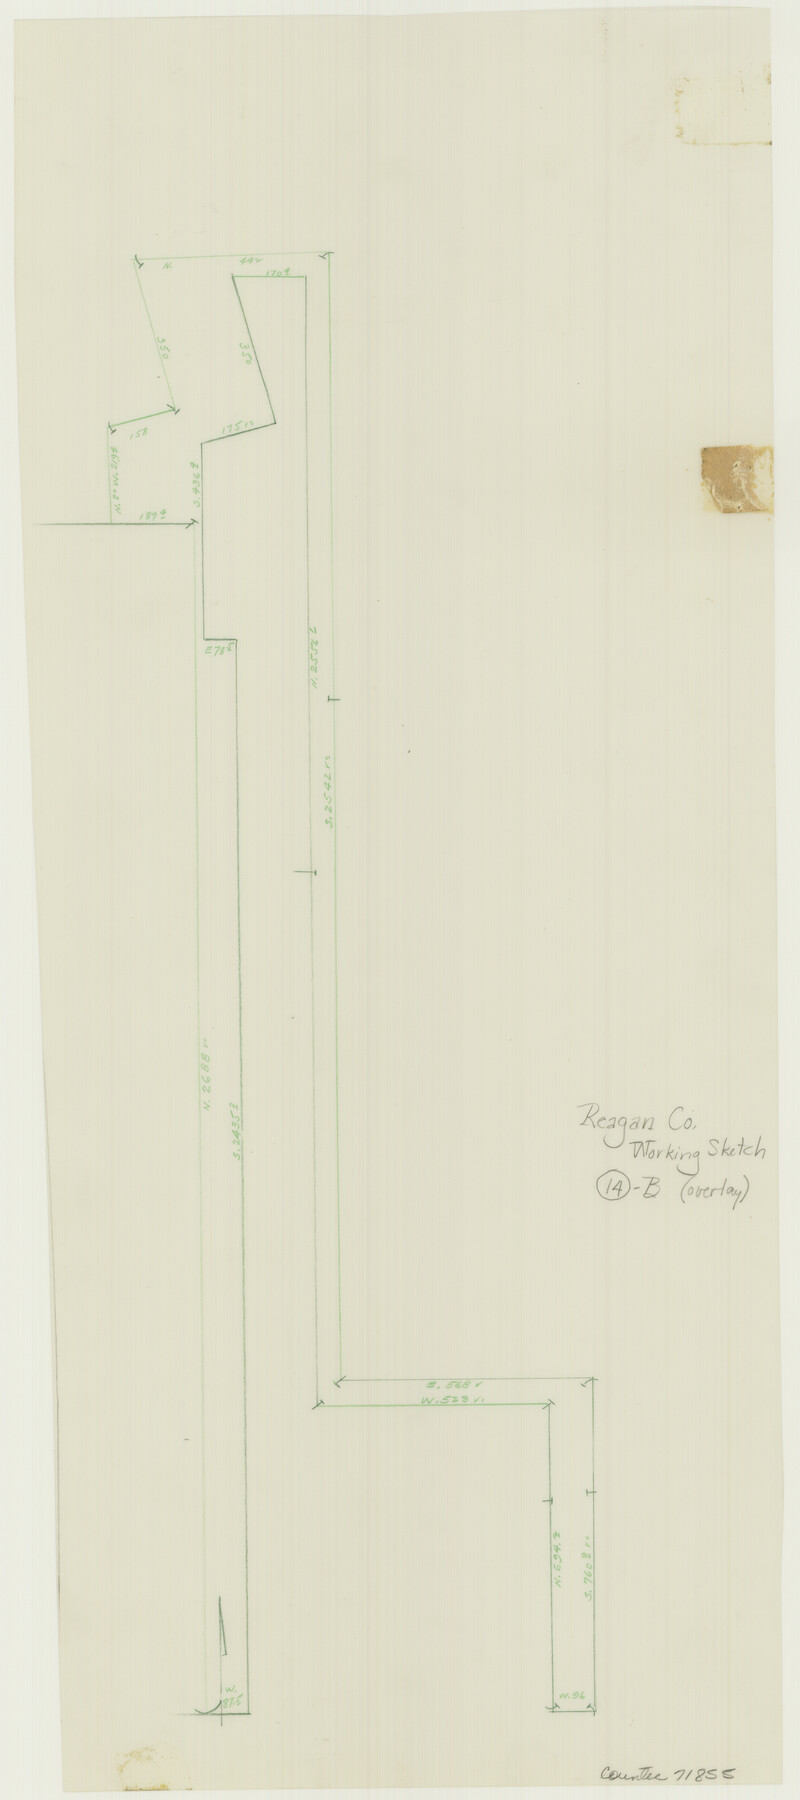 71855, Reagan County Working Sketch 14b, General Map Collection